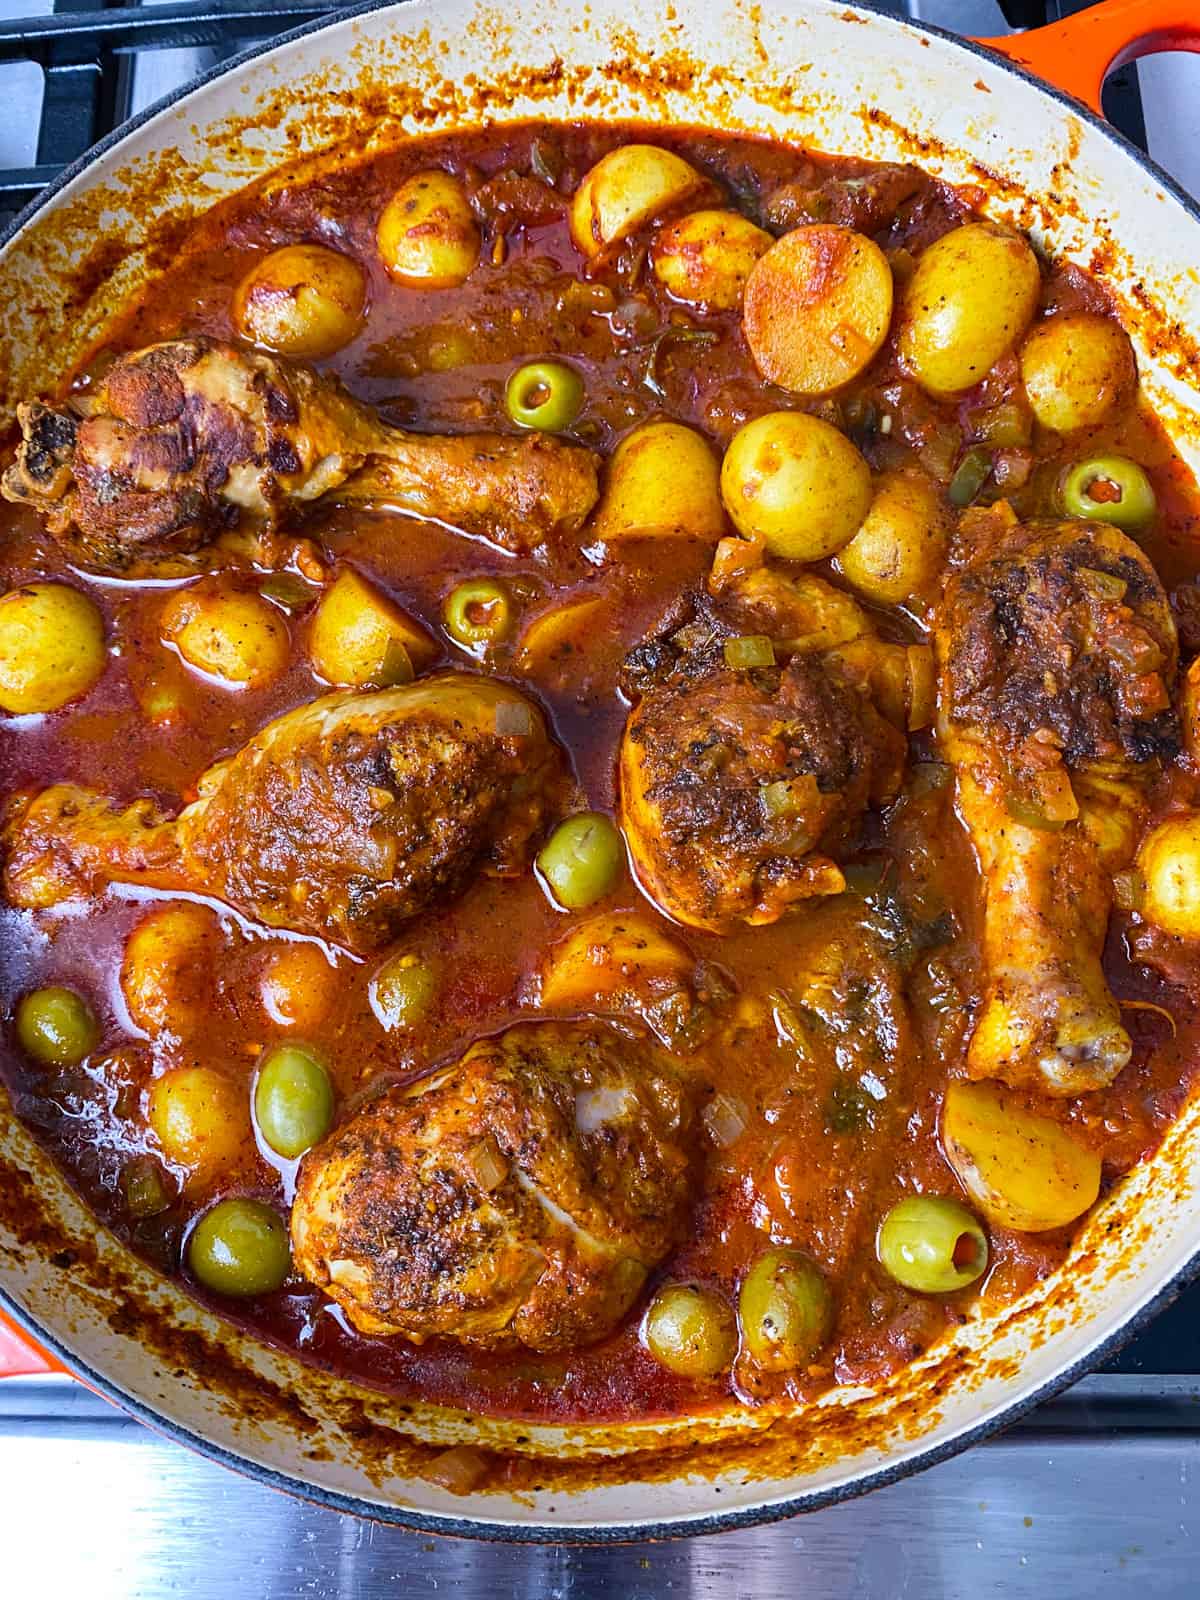 Cook the Spanish chicken stew until the chicken is cooked through and sauce has thickened, about 25 minutes.